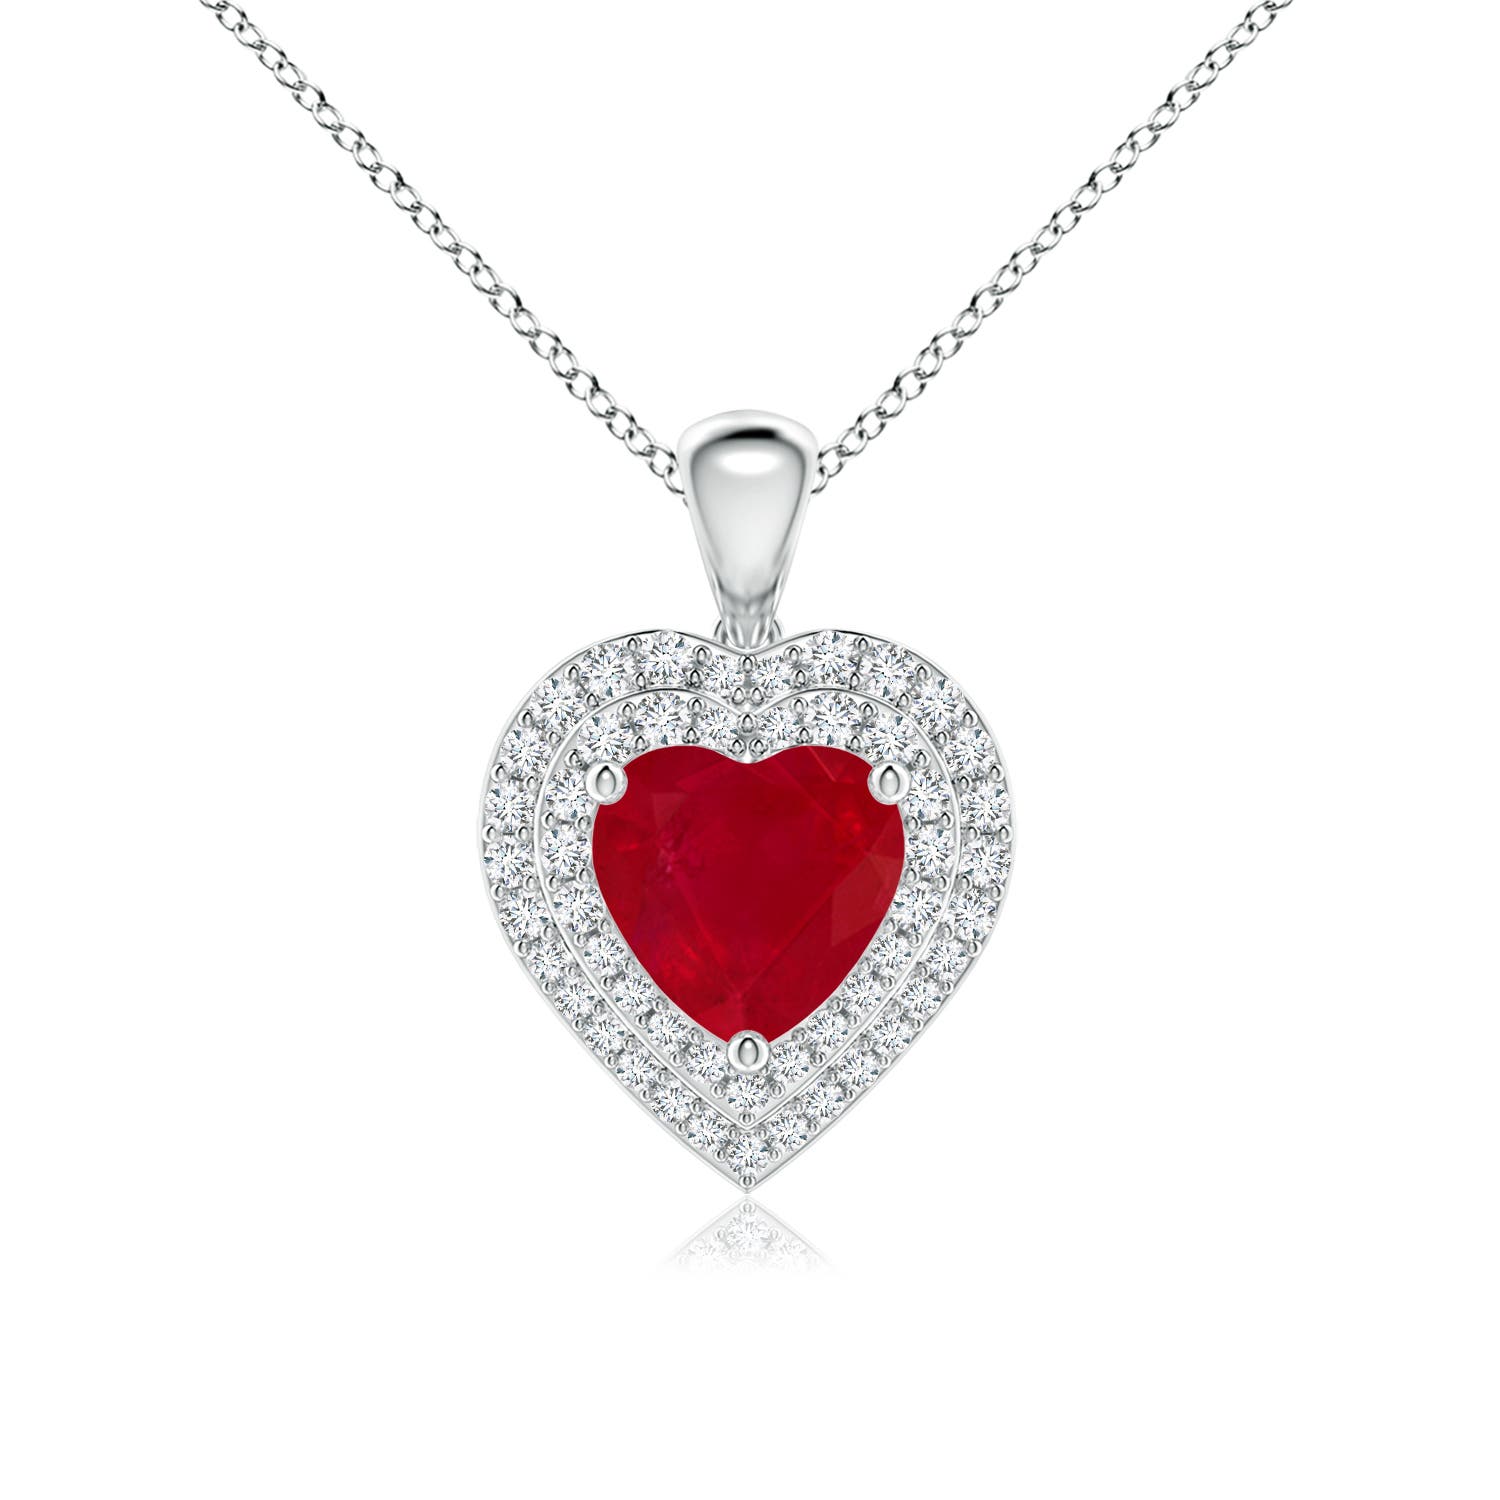 AA - Ruby / 2.08 CT / 14 KT White Gold